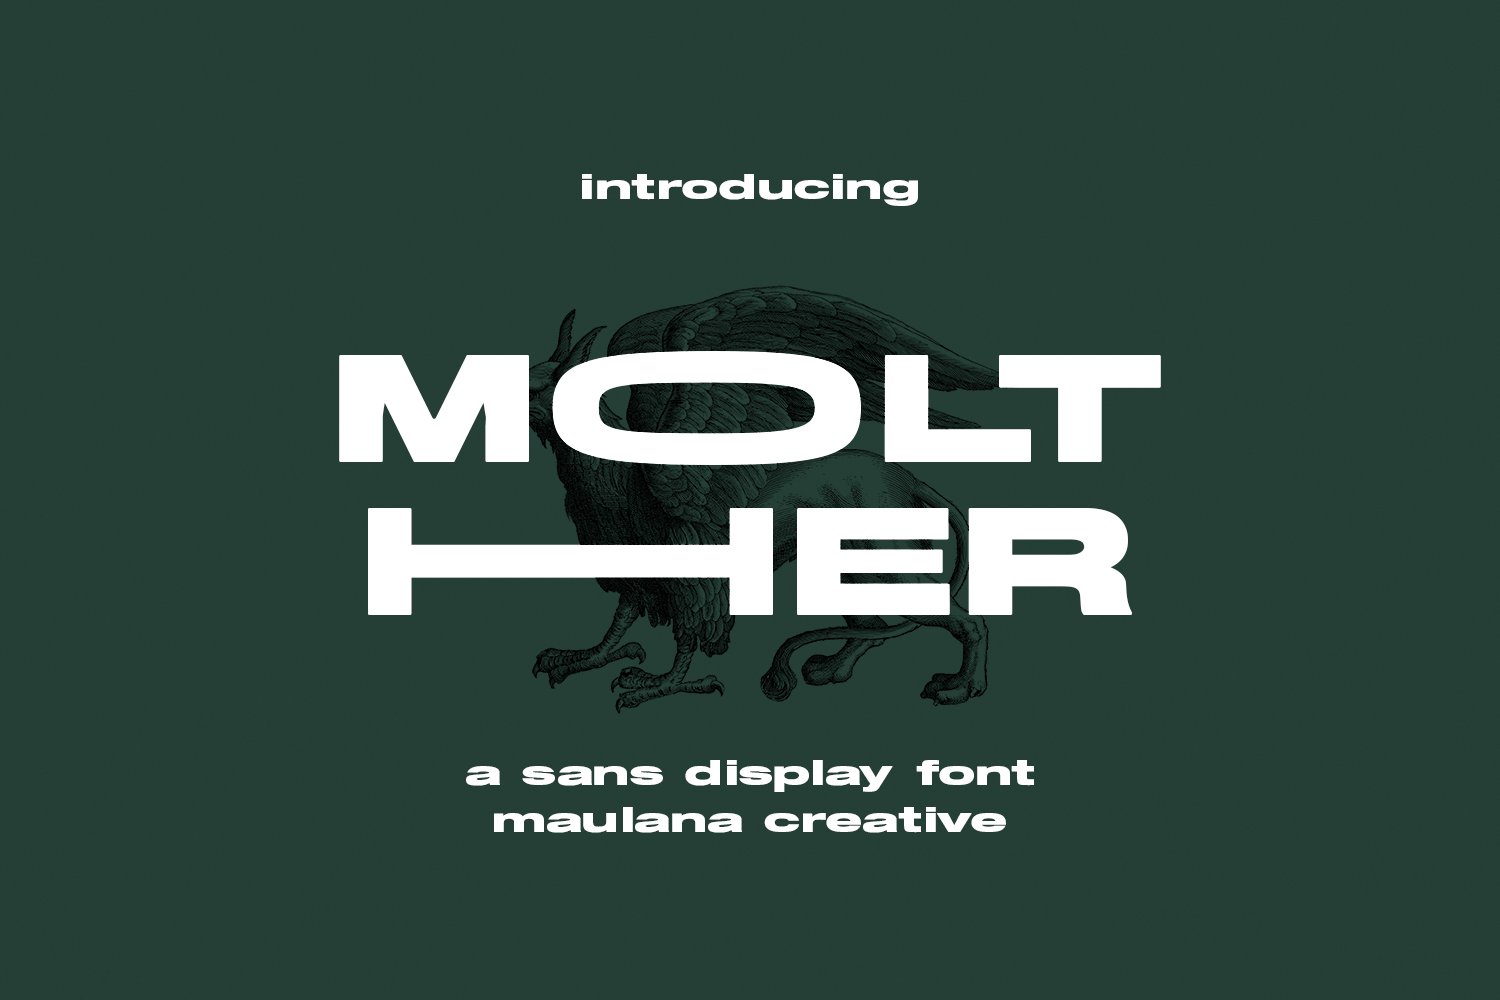 Molther Sans Display Font cover image.